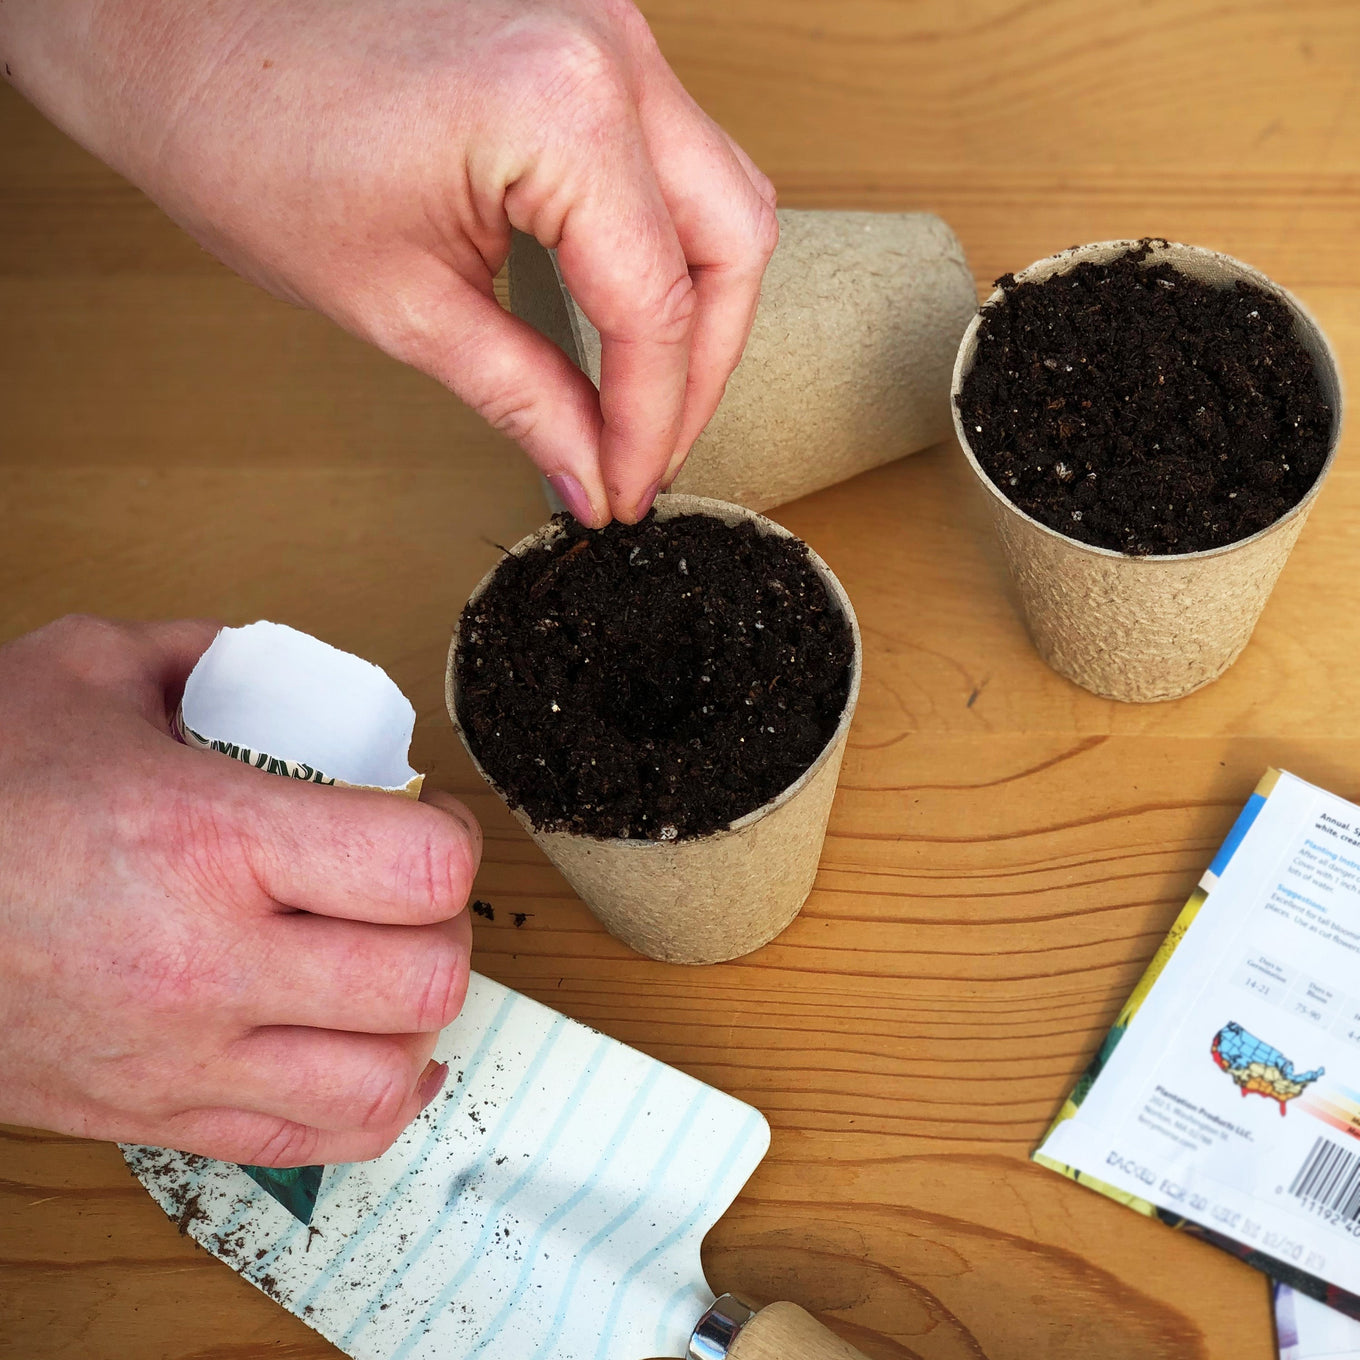 Sowing Waltham Butternut Squash Seeds into Jiffy biodegradable peat pots filled with sowing mix.